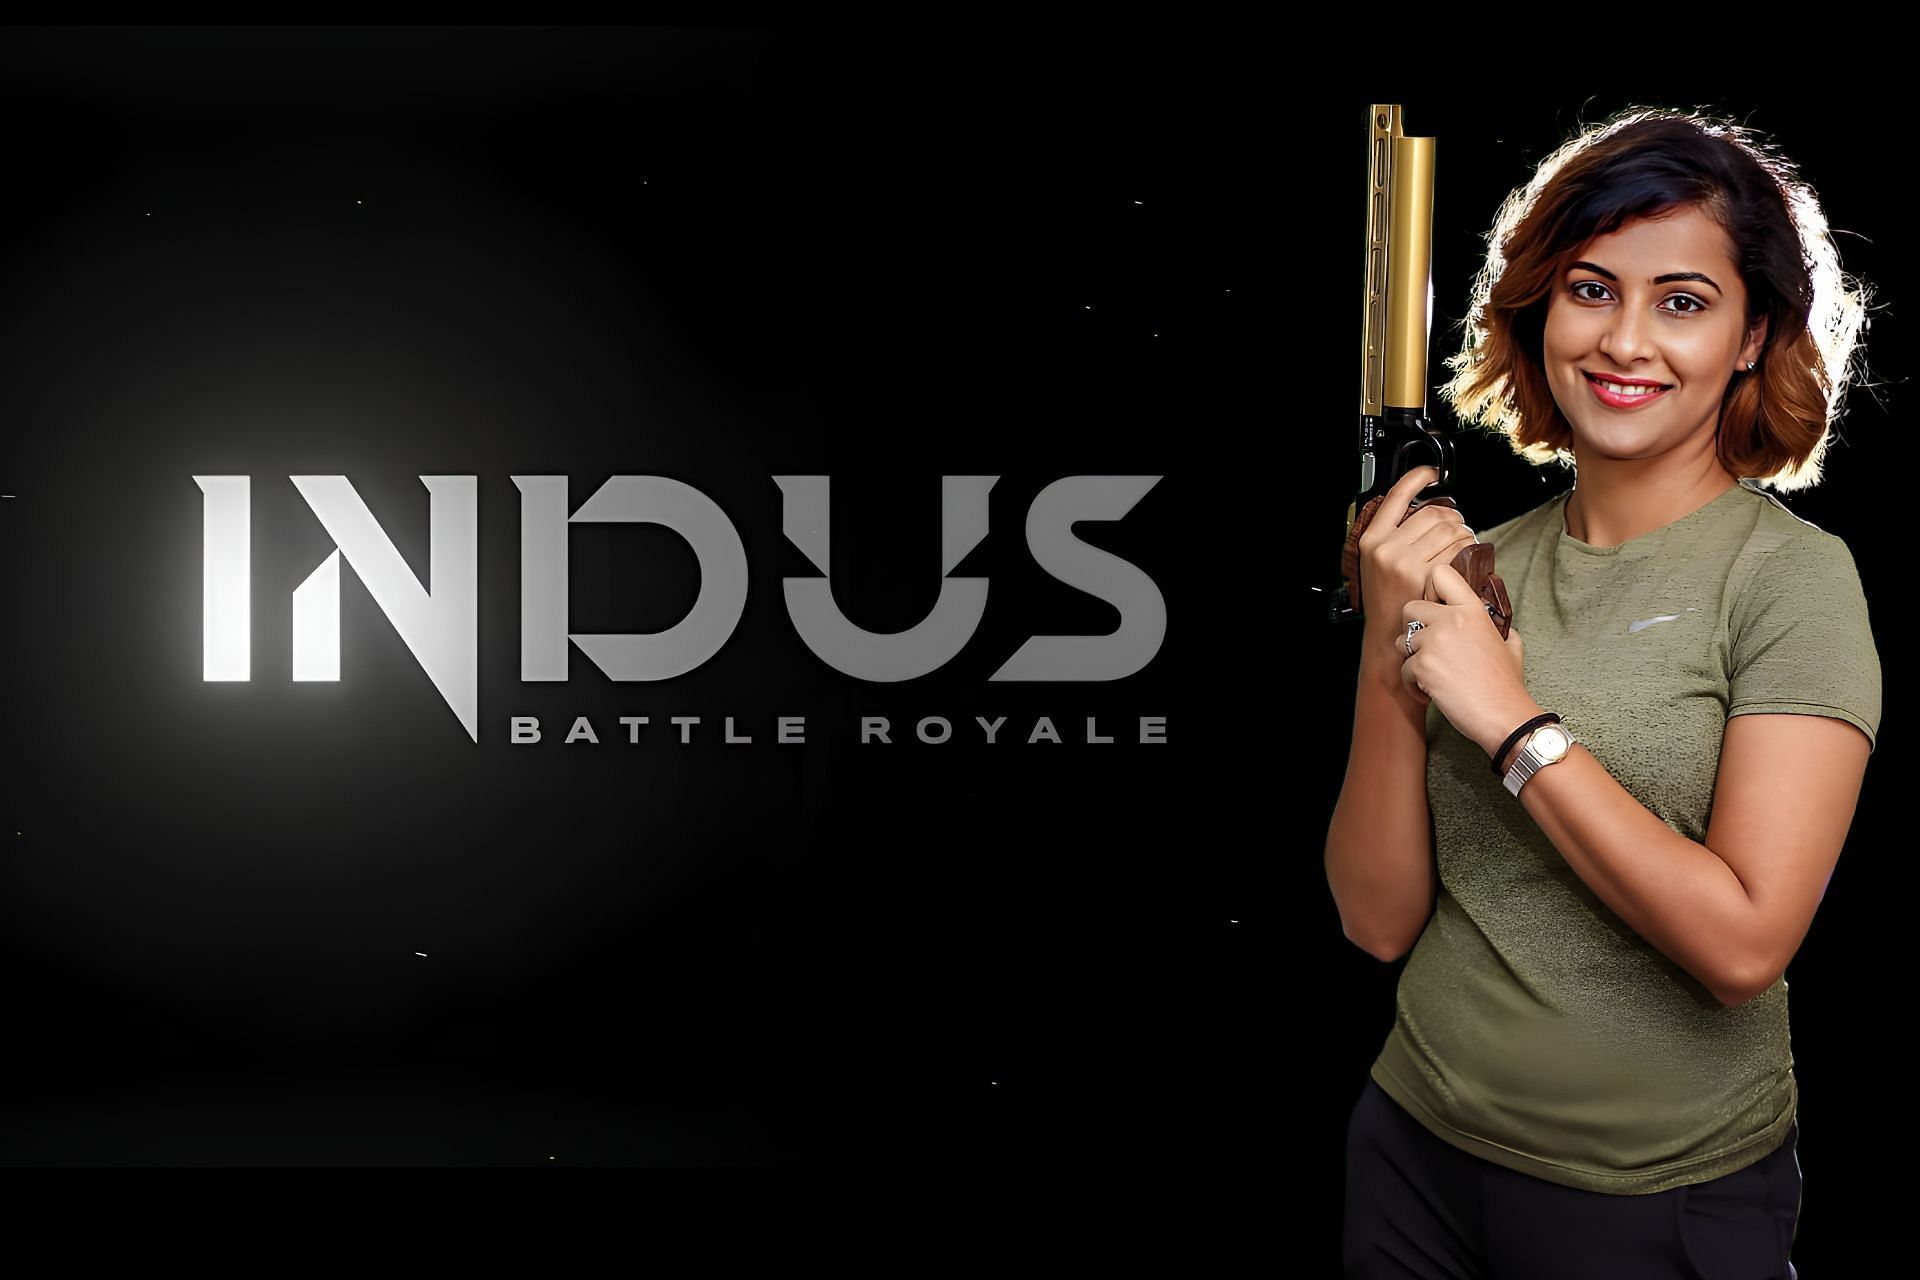 Indus Battle Royale to collaborate with Indian Olympic Shooter Heena Sidhu (Image via Sportskeeda)